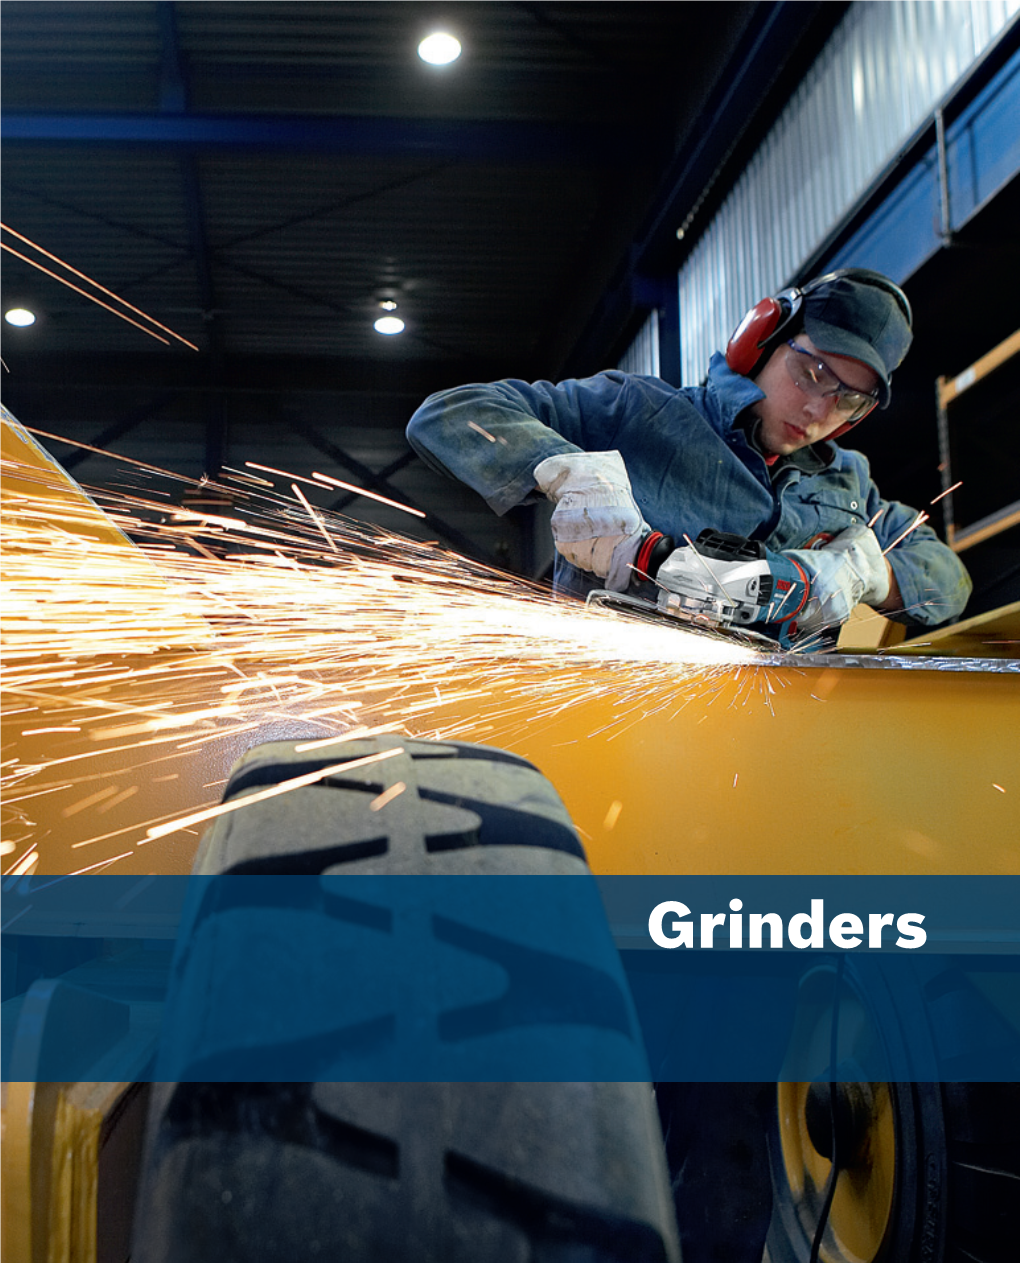 Grinders 34 | 2012/2013 Power Tools & Accessories Catalog